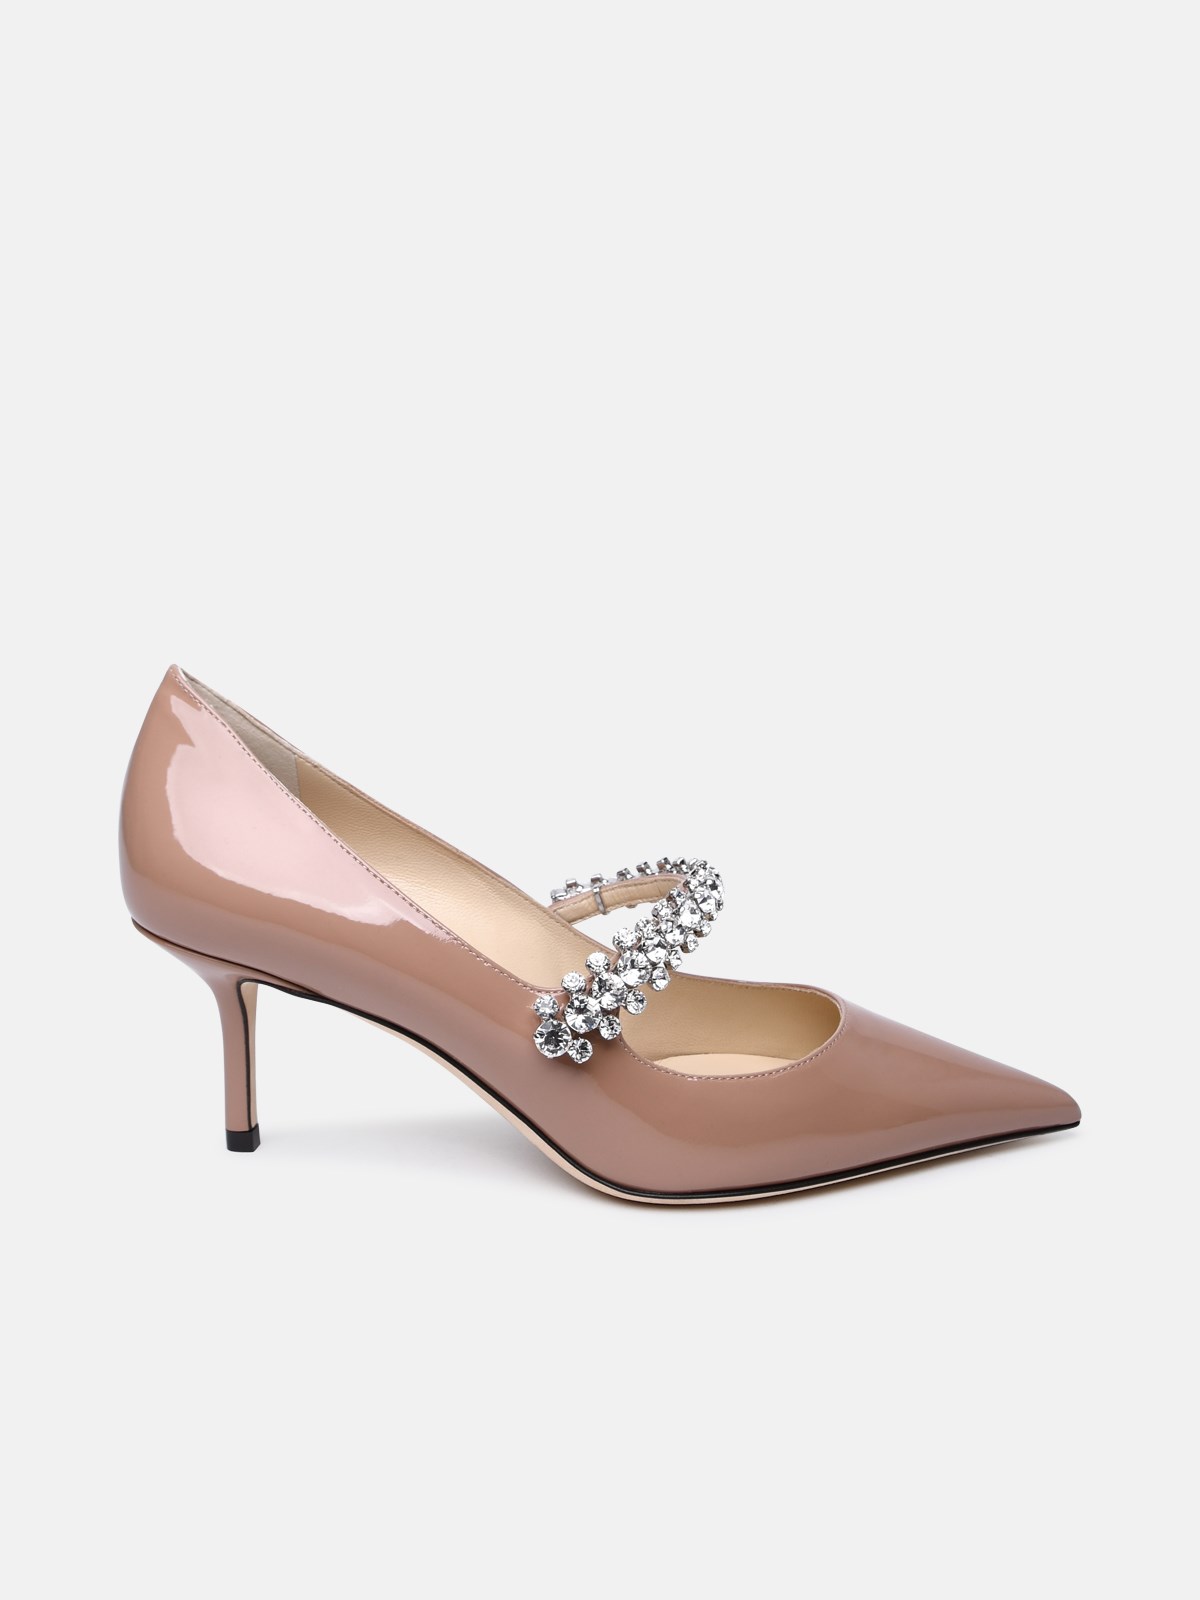 Jimmy Choo Patent Pumps Nude In Pink